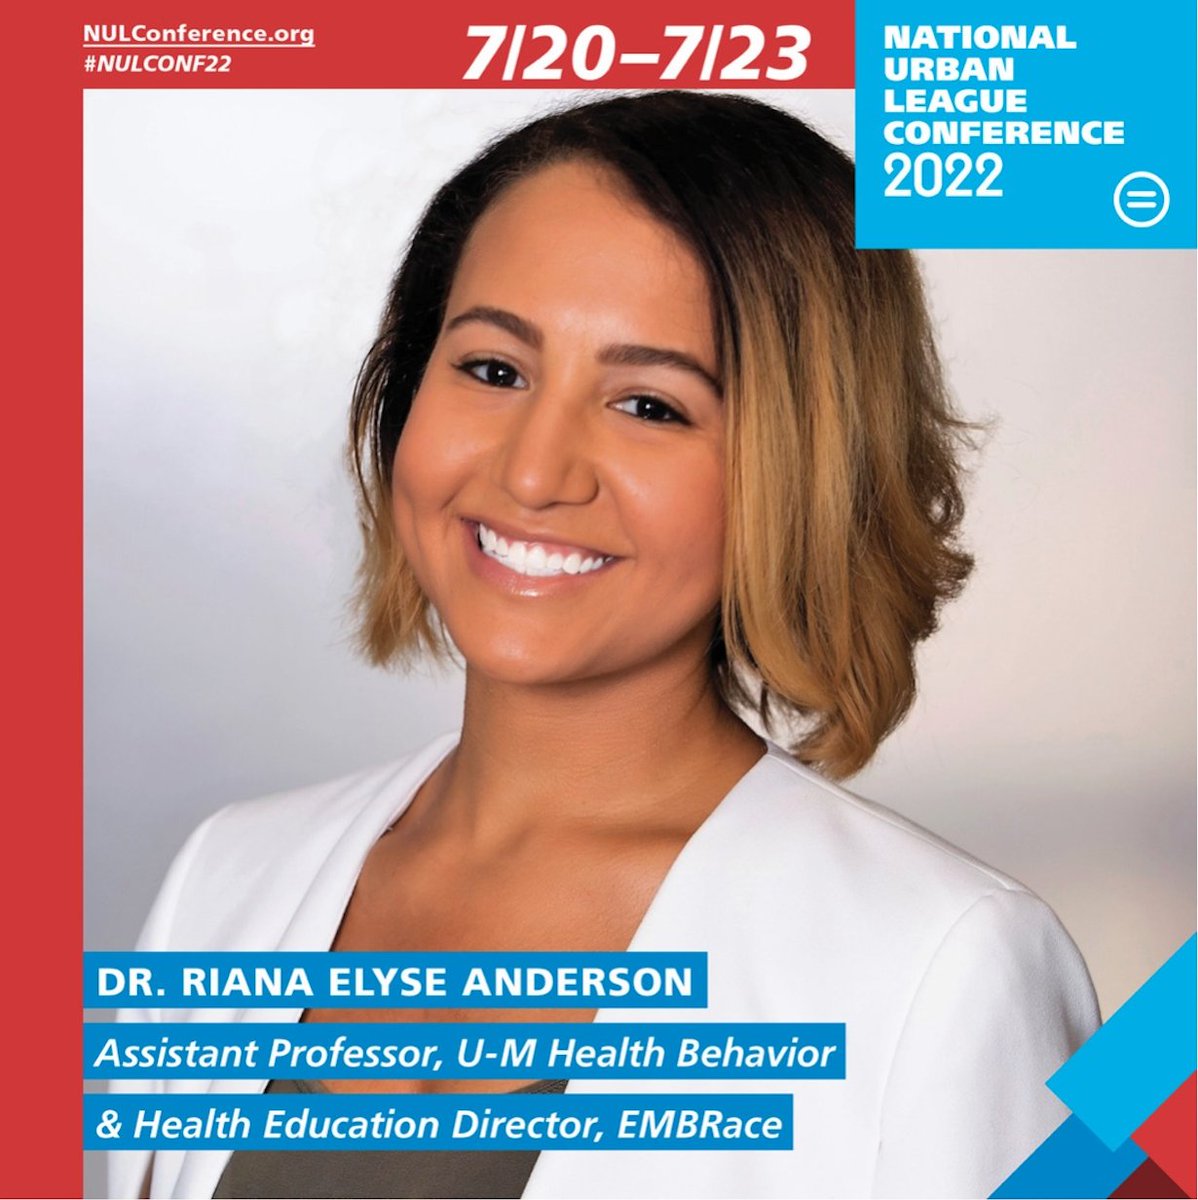 A sis is thrilled to speak at the @NatUrbanLeague's Forum on 'Black Health: Racism is a Preexisting Condition' on Thursday at 11:15aE! Stream online or catch me live in DC if you'll be there! #NULCONF22 

conference.iamempowered.com/washington-202…